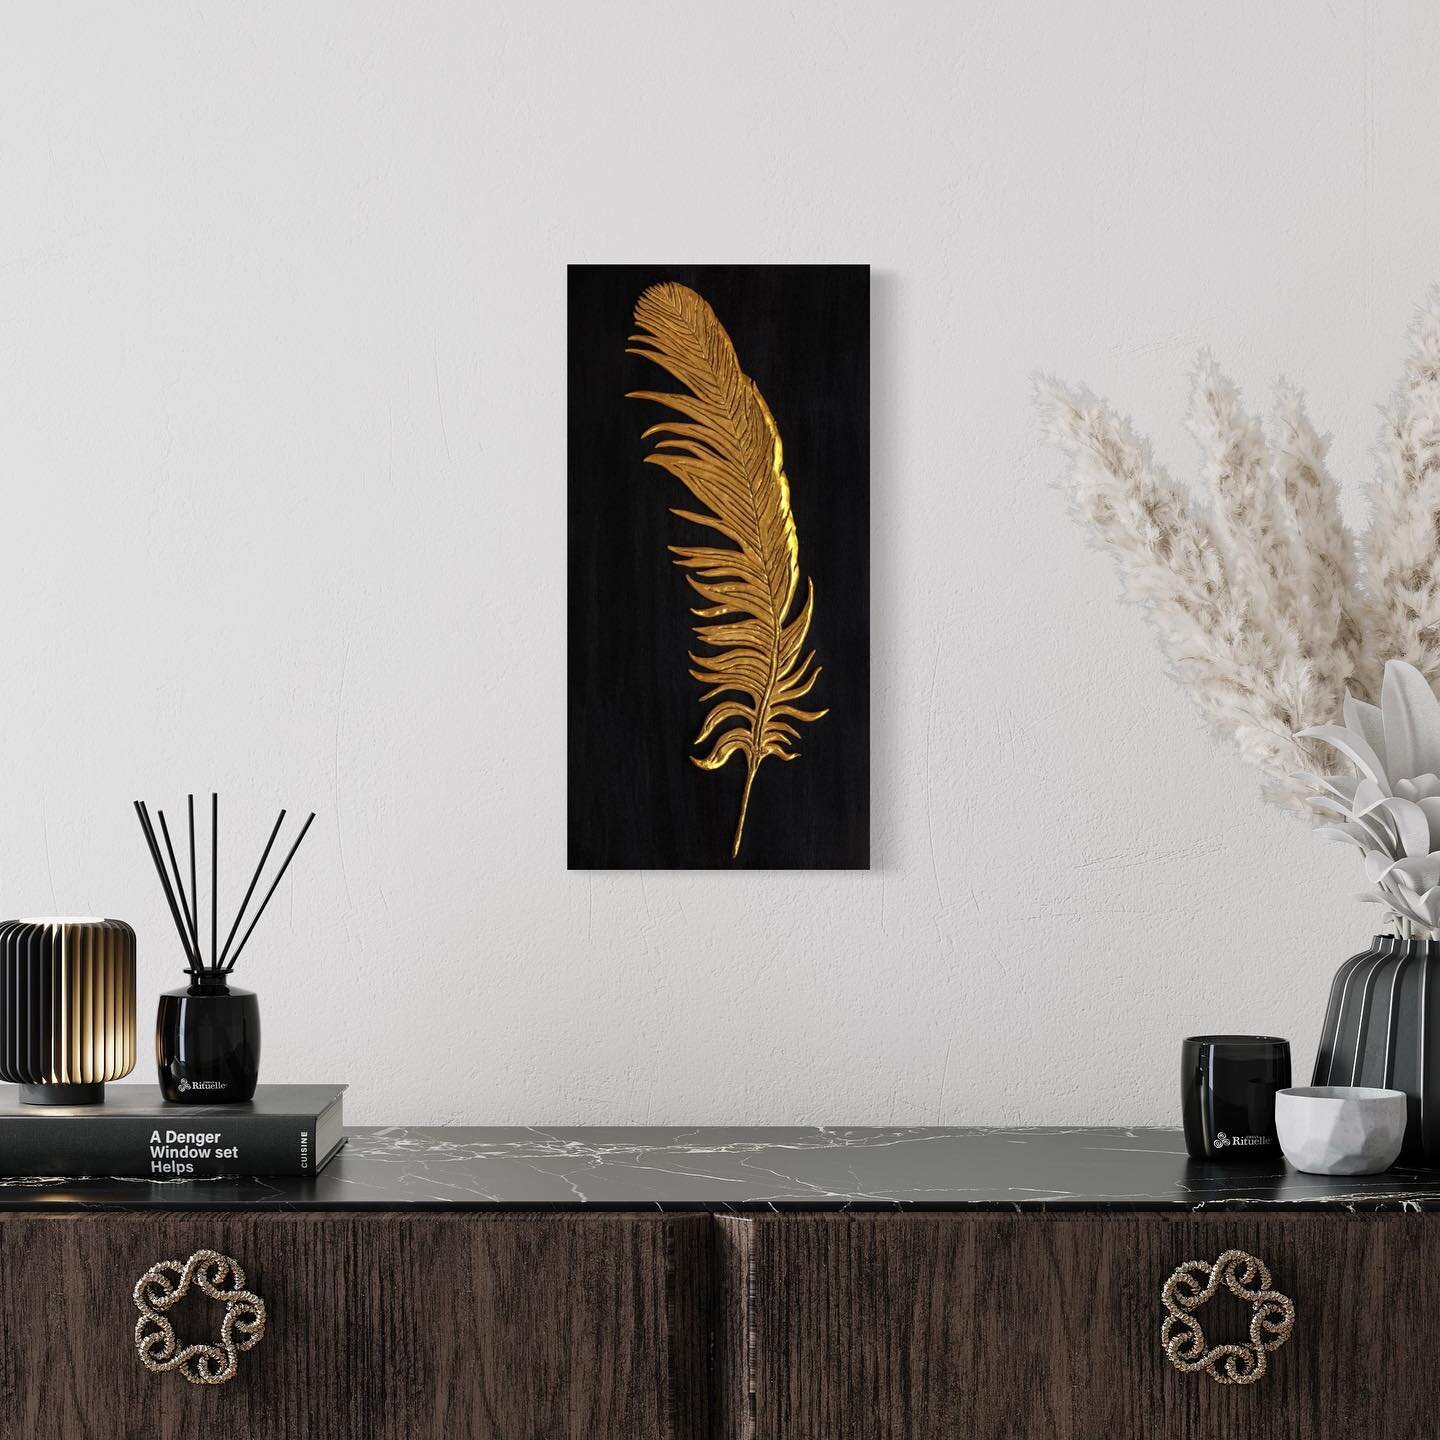 &ldquo;Feather&rdquo; 🪶 

Interestingly, I&rsquo;ve gotten feedback that this is more of a &ldquo;design&rdquo; piece. I believe that was the word that was used, and the implication is that it lacks depth and any significance beyond what you see at 